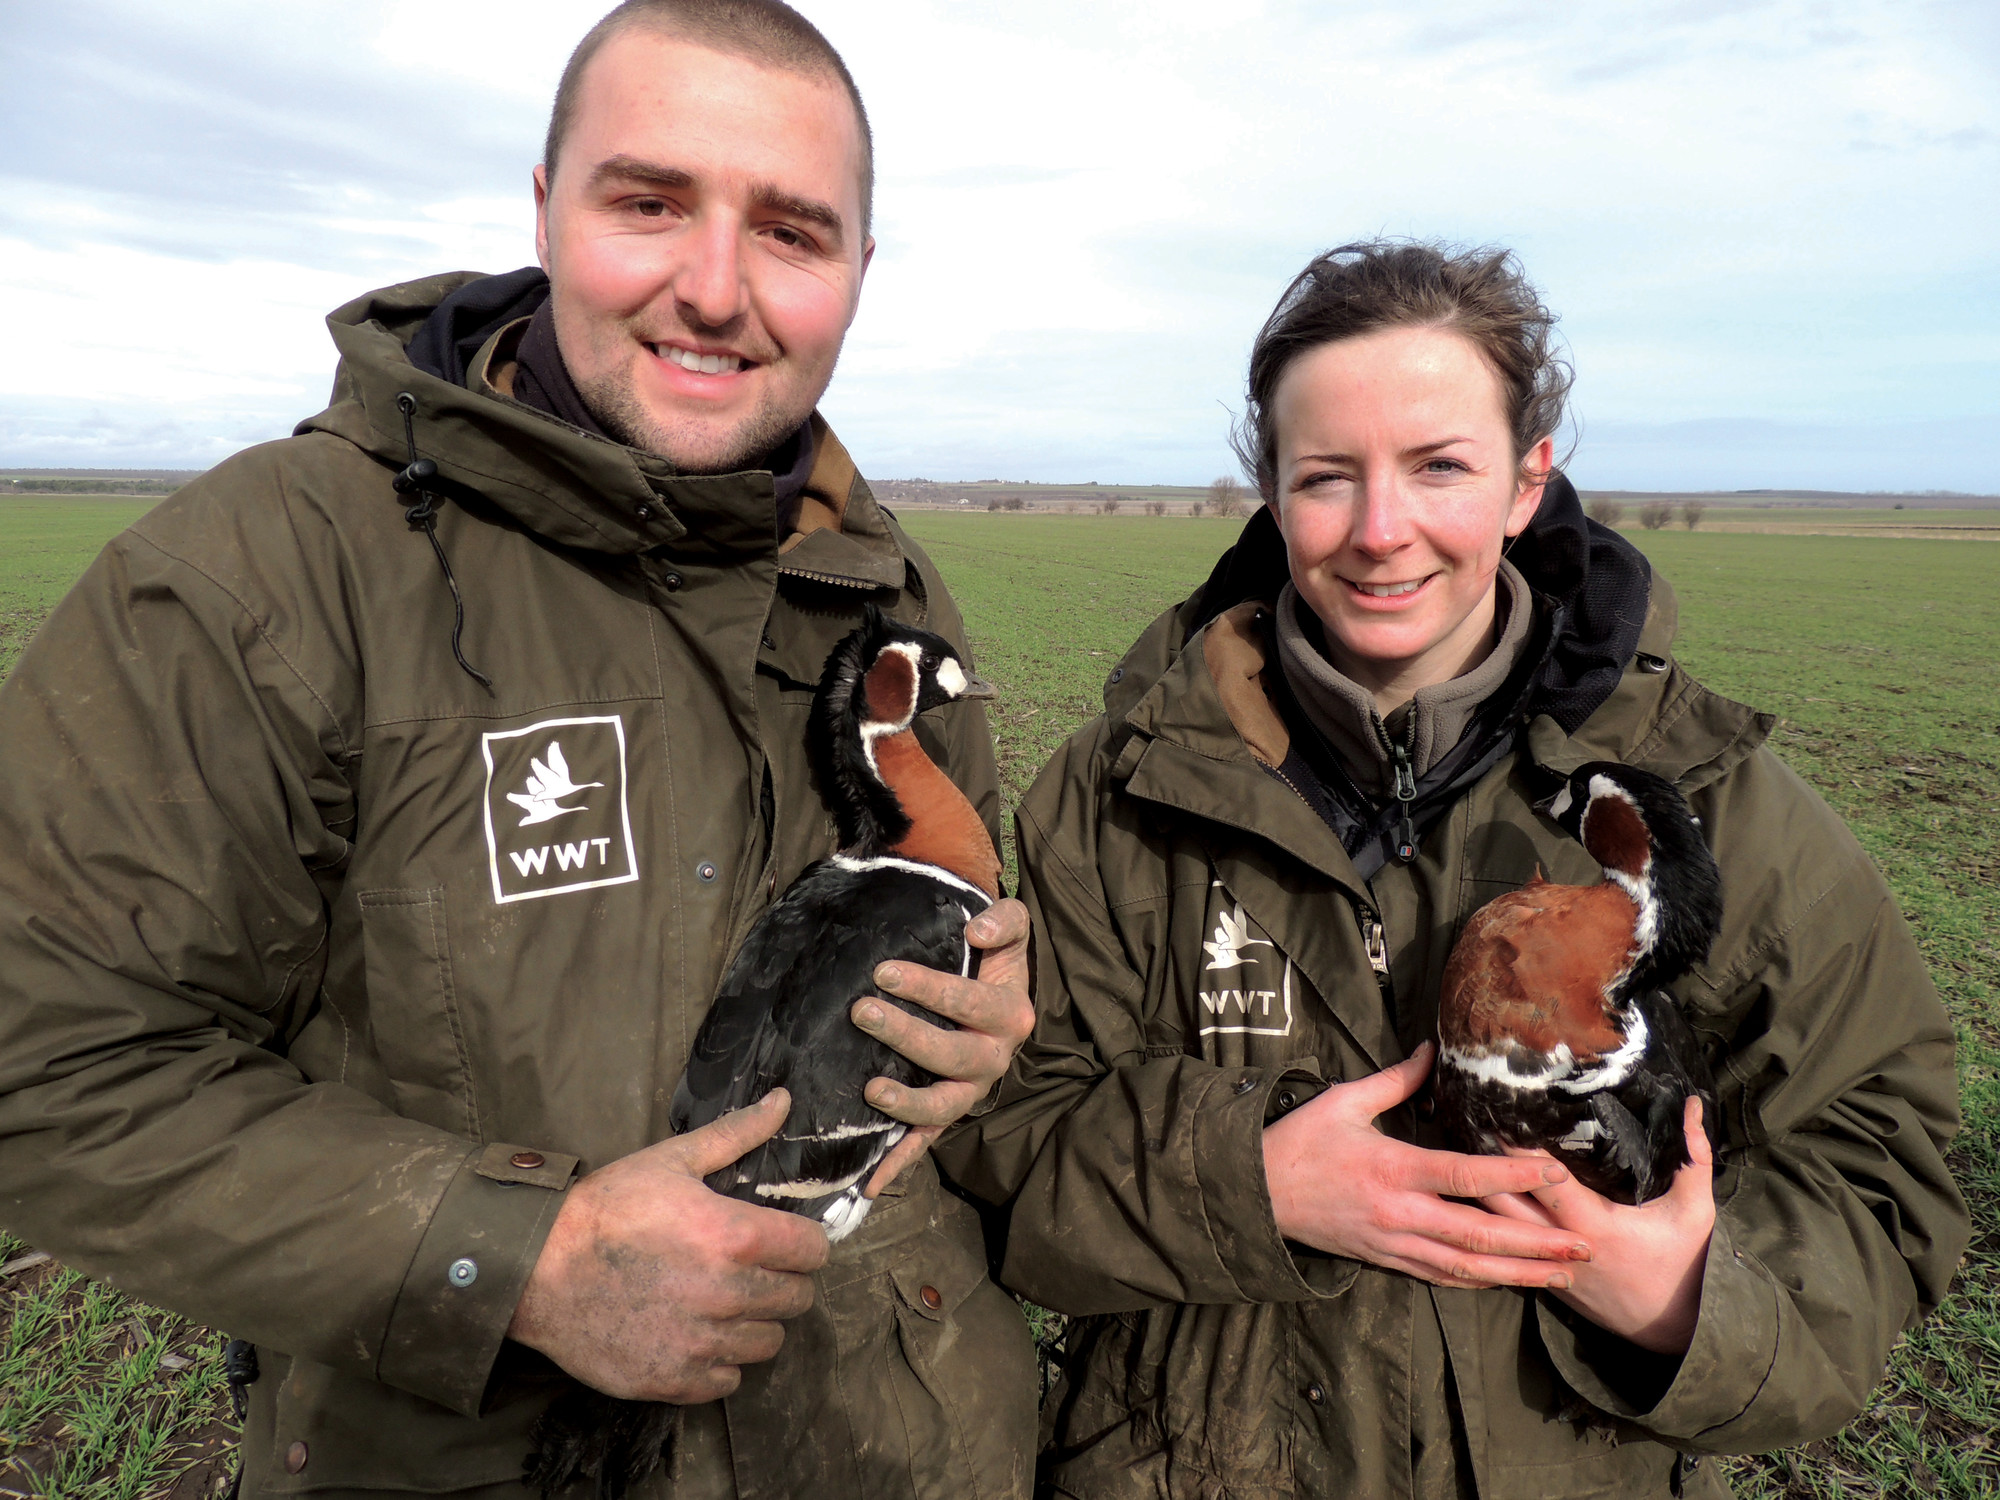 WWT are working to slow a 50% decline in red-breasted geese numbers - a project funded by the EU.